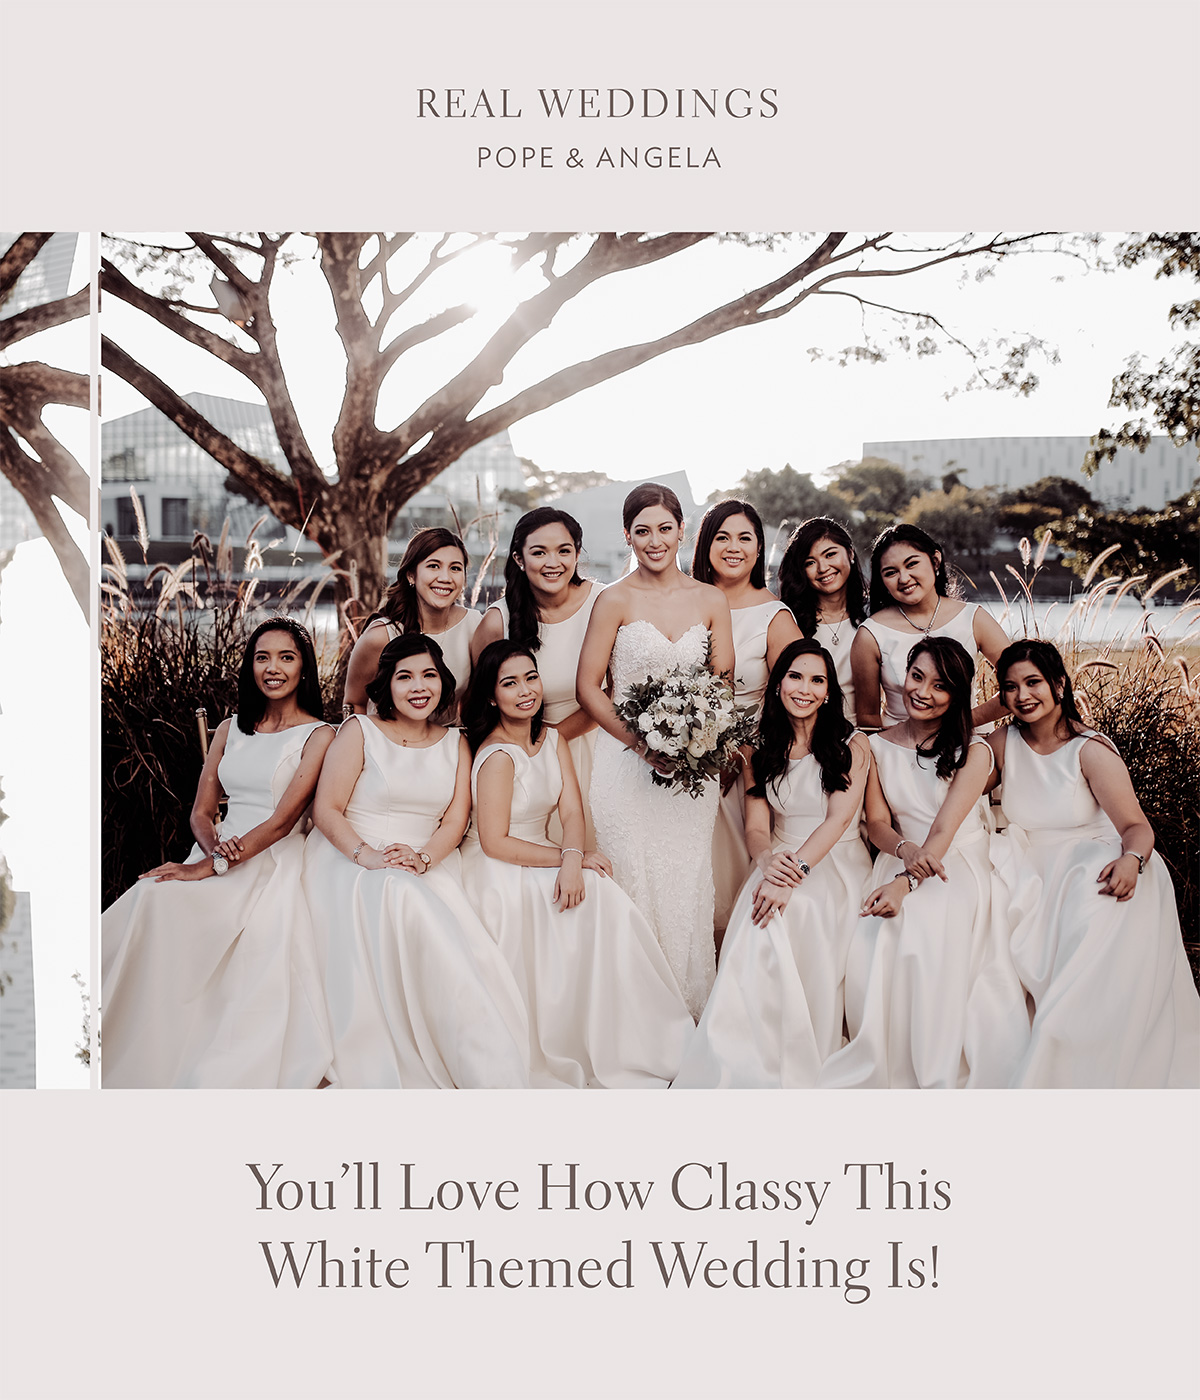 You’ll Love How Classy This White Themed Wedding Is!